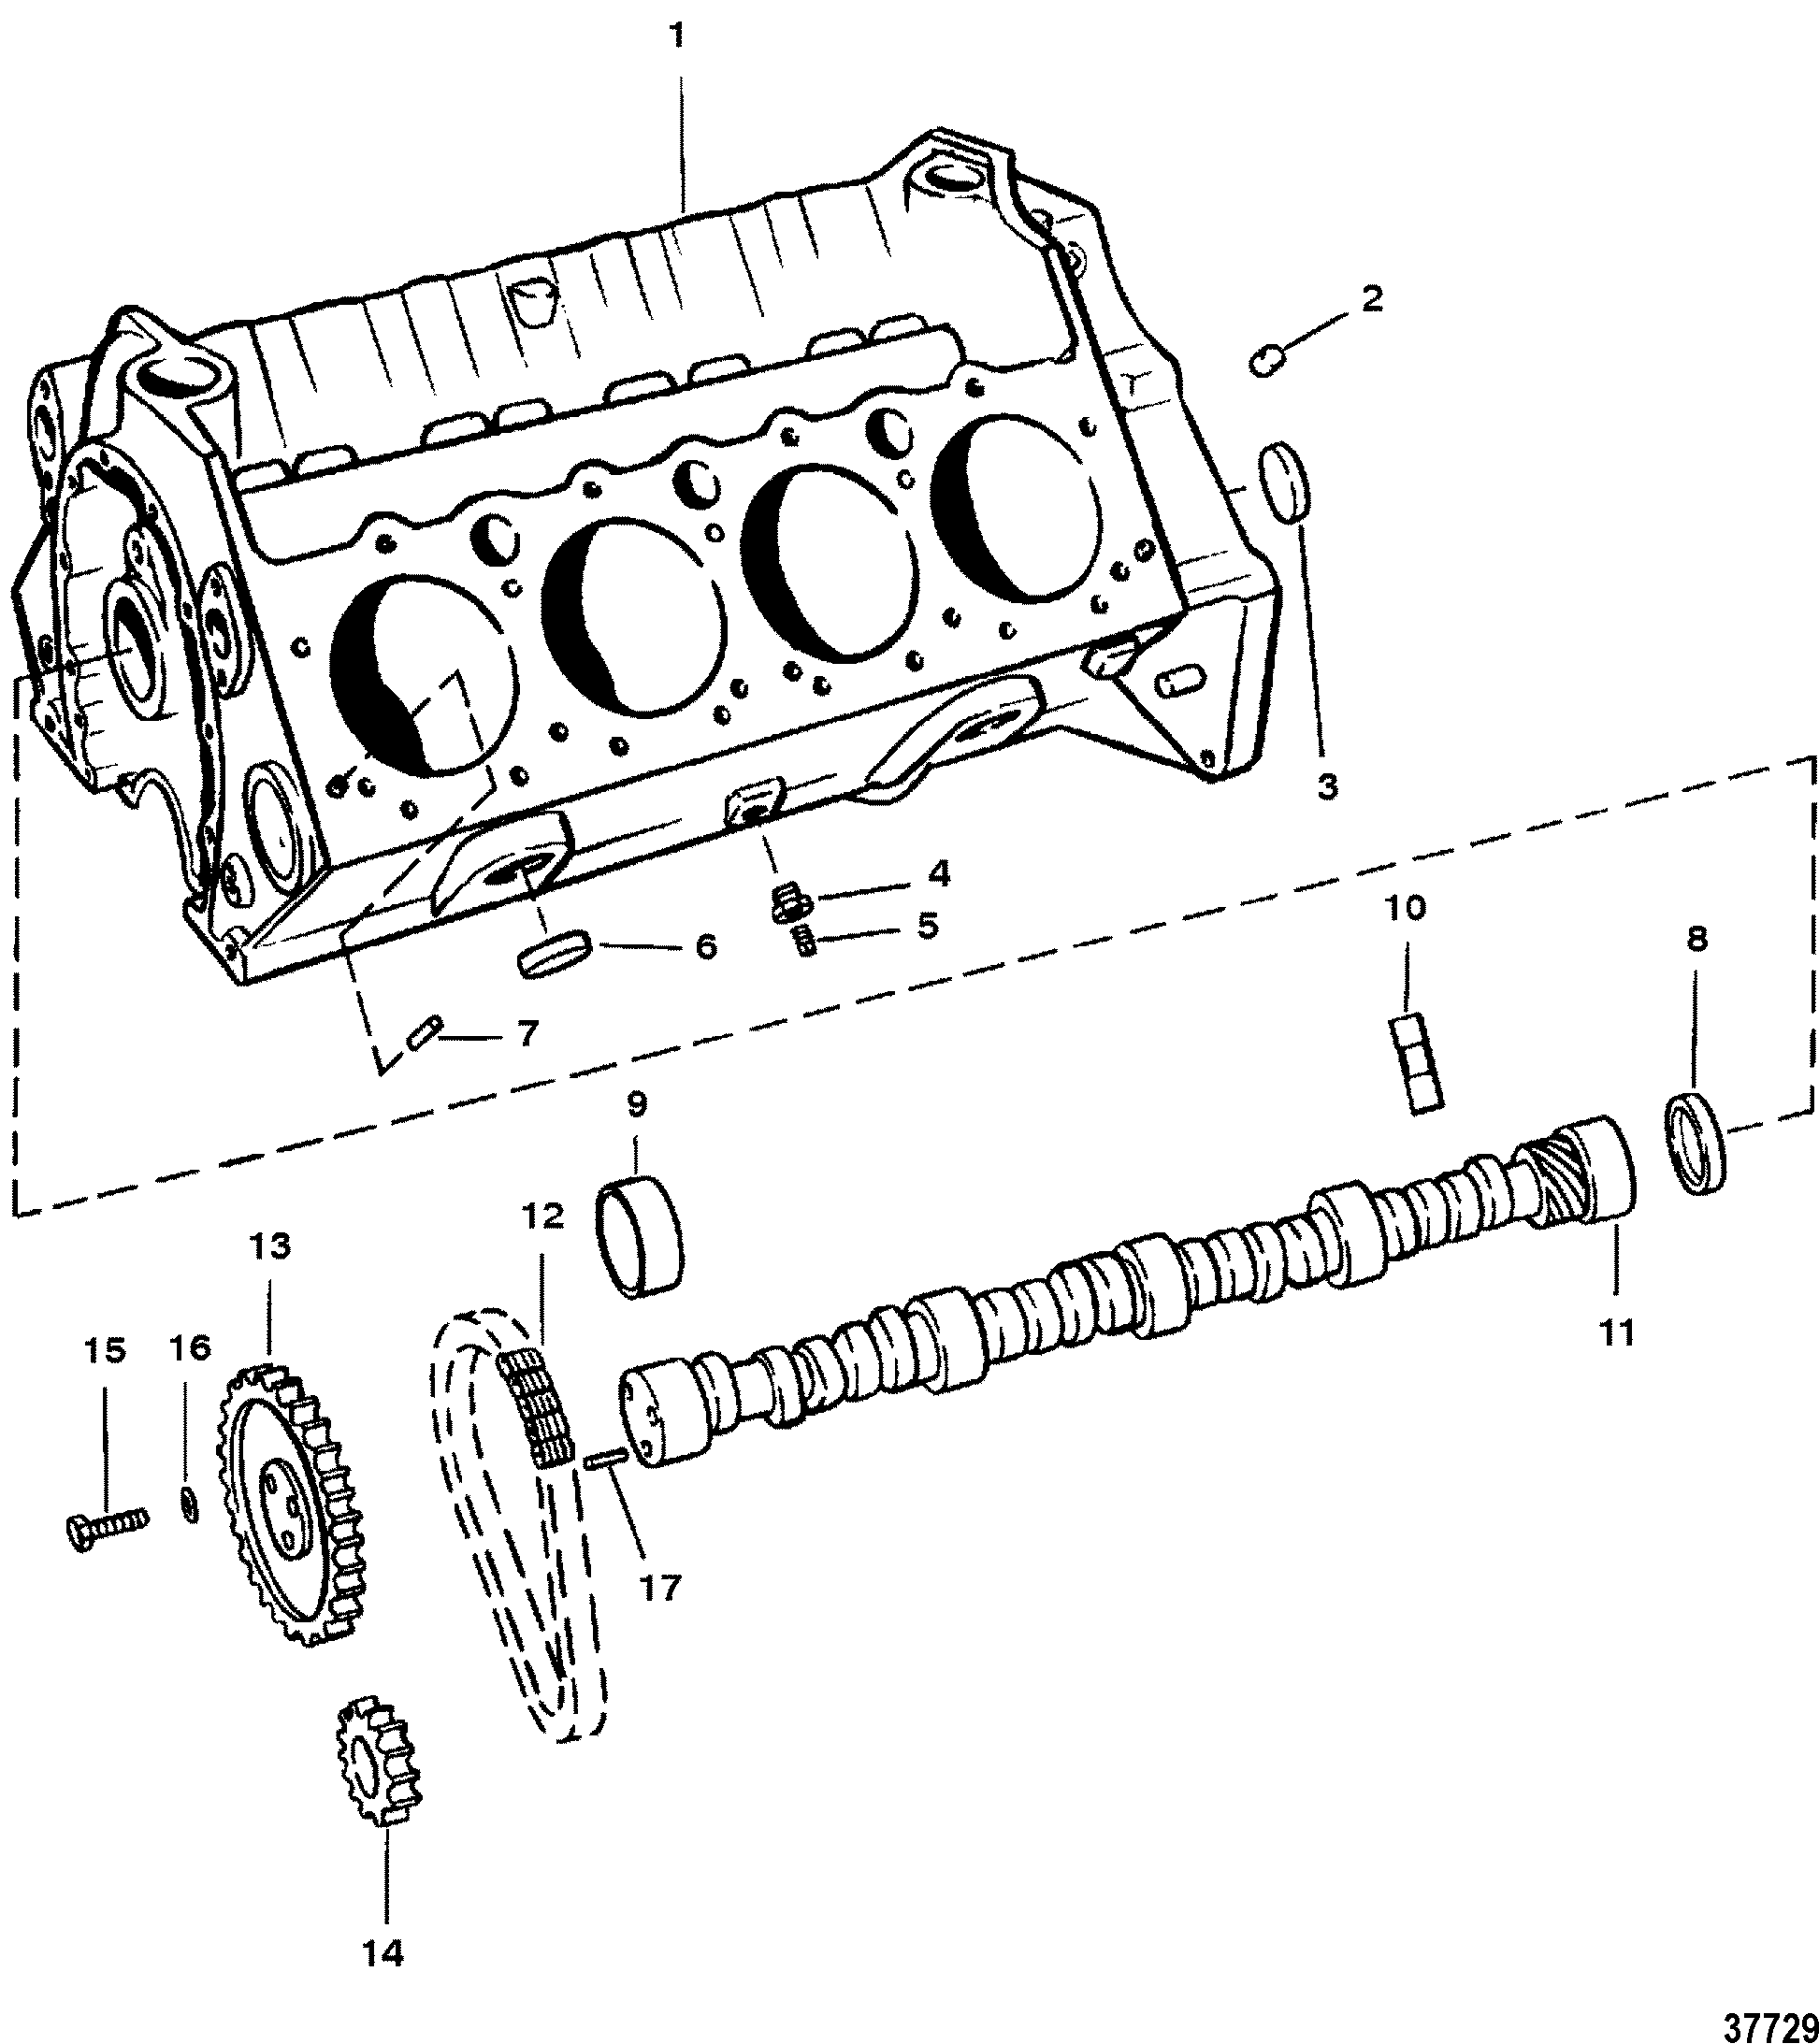 CYLINDER BLOCK AND CAMSHAFT(FLAT ROLLERS)